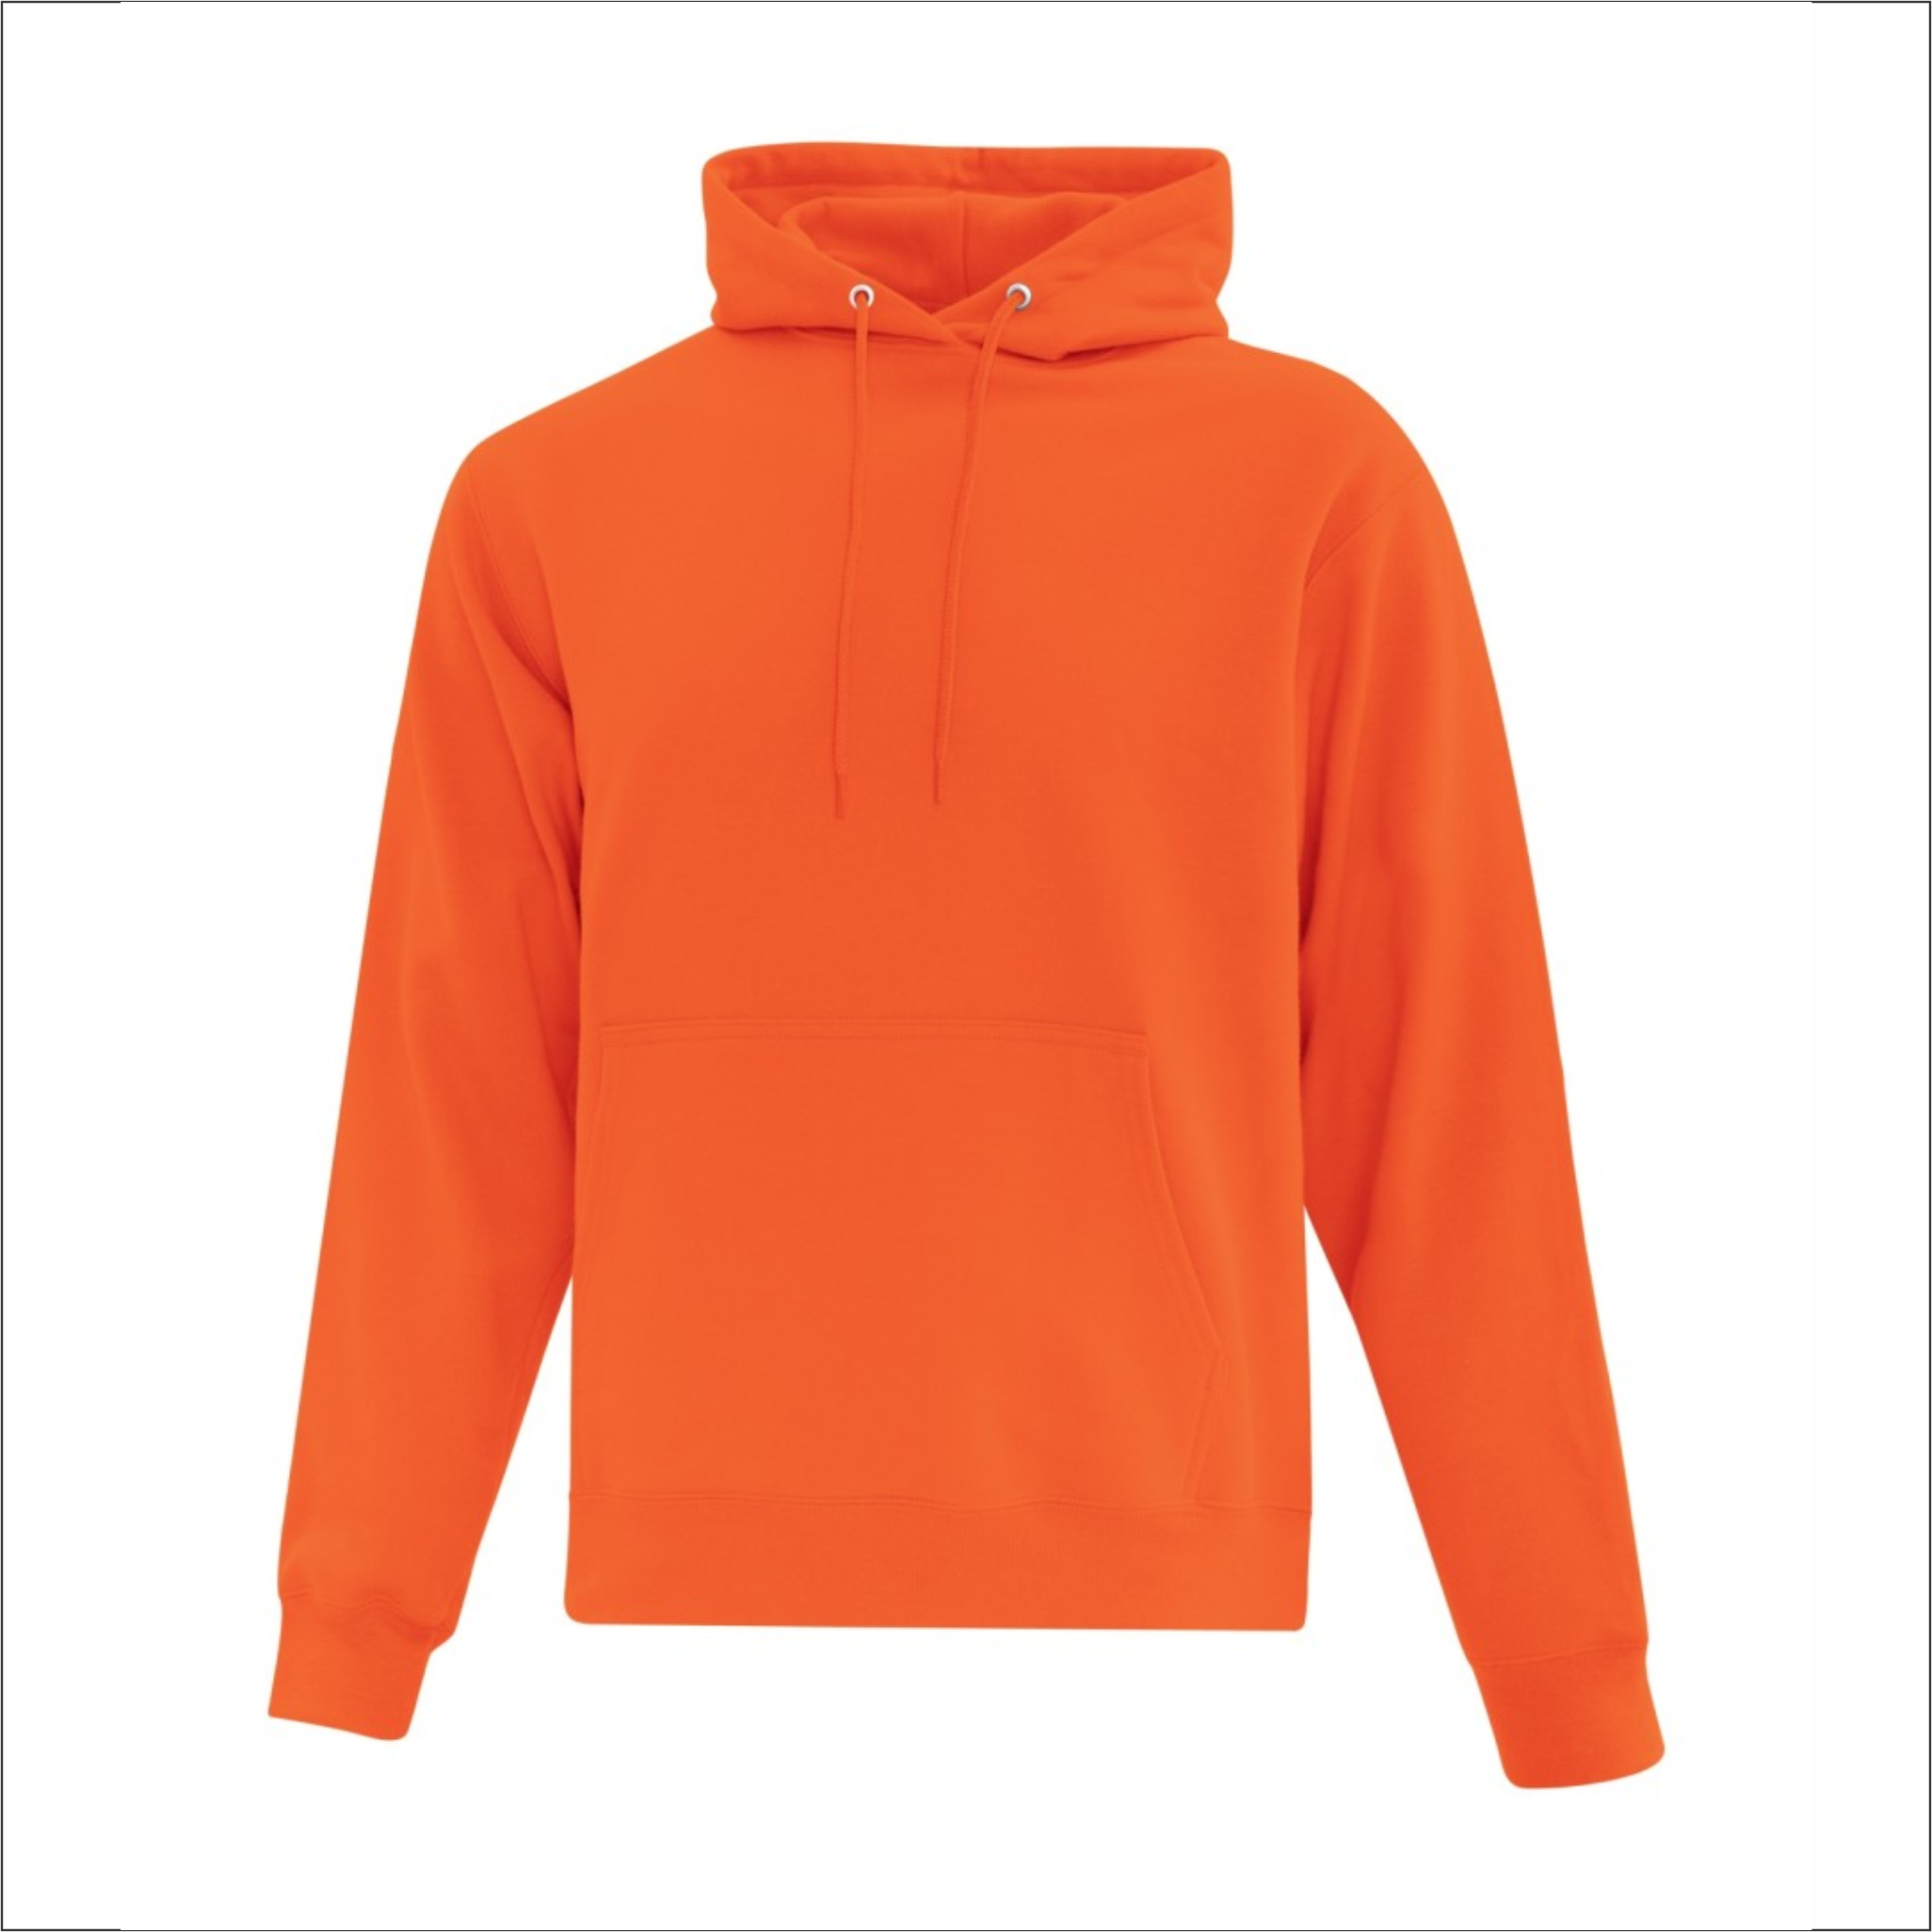 Products Adult Hoodie - Orange Cotton/Polyester - ATC F2500